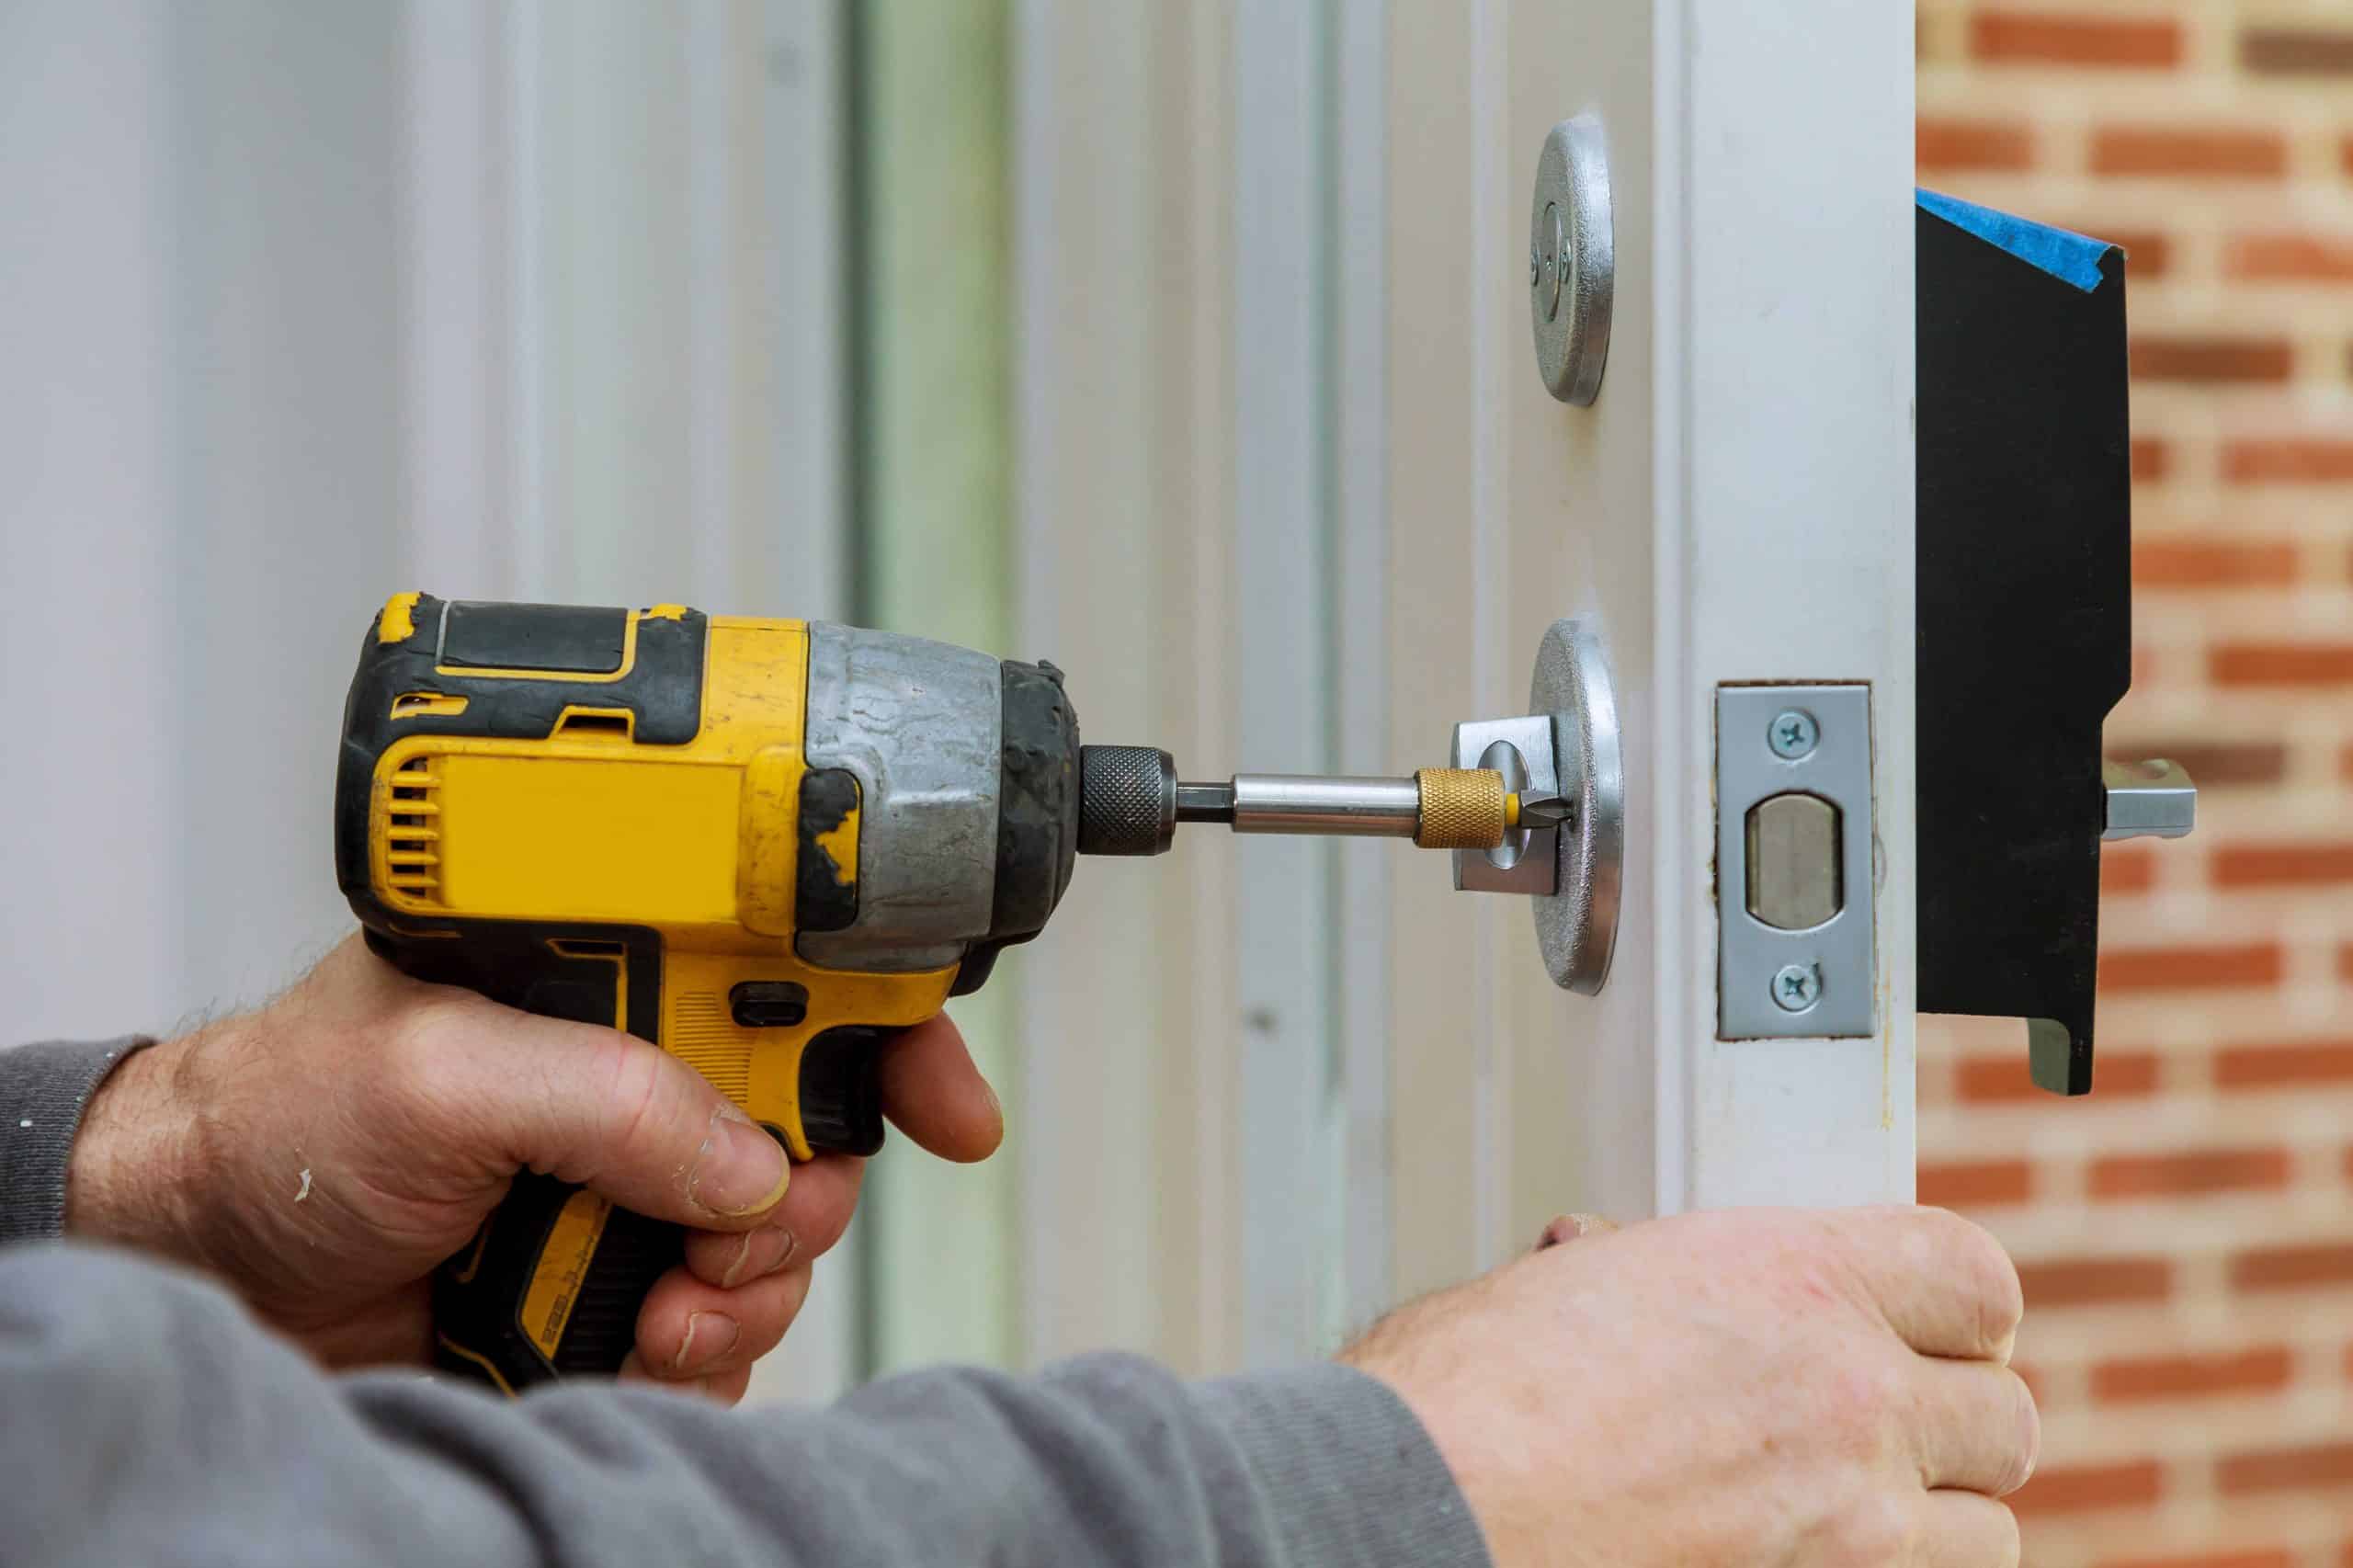 How does a professional Locksmith help you?